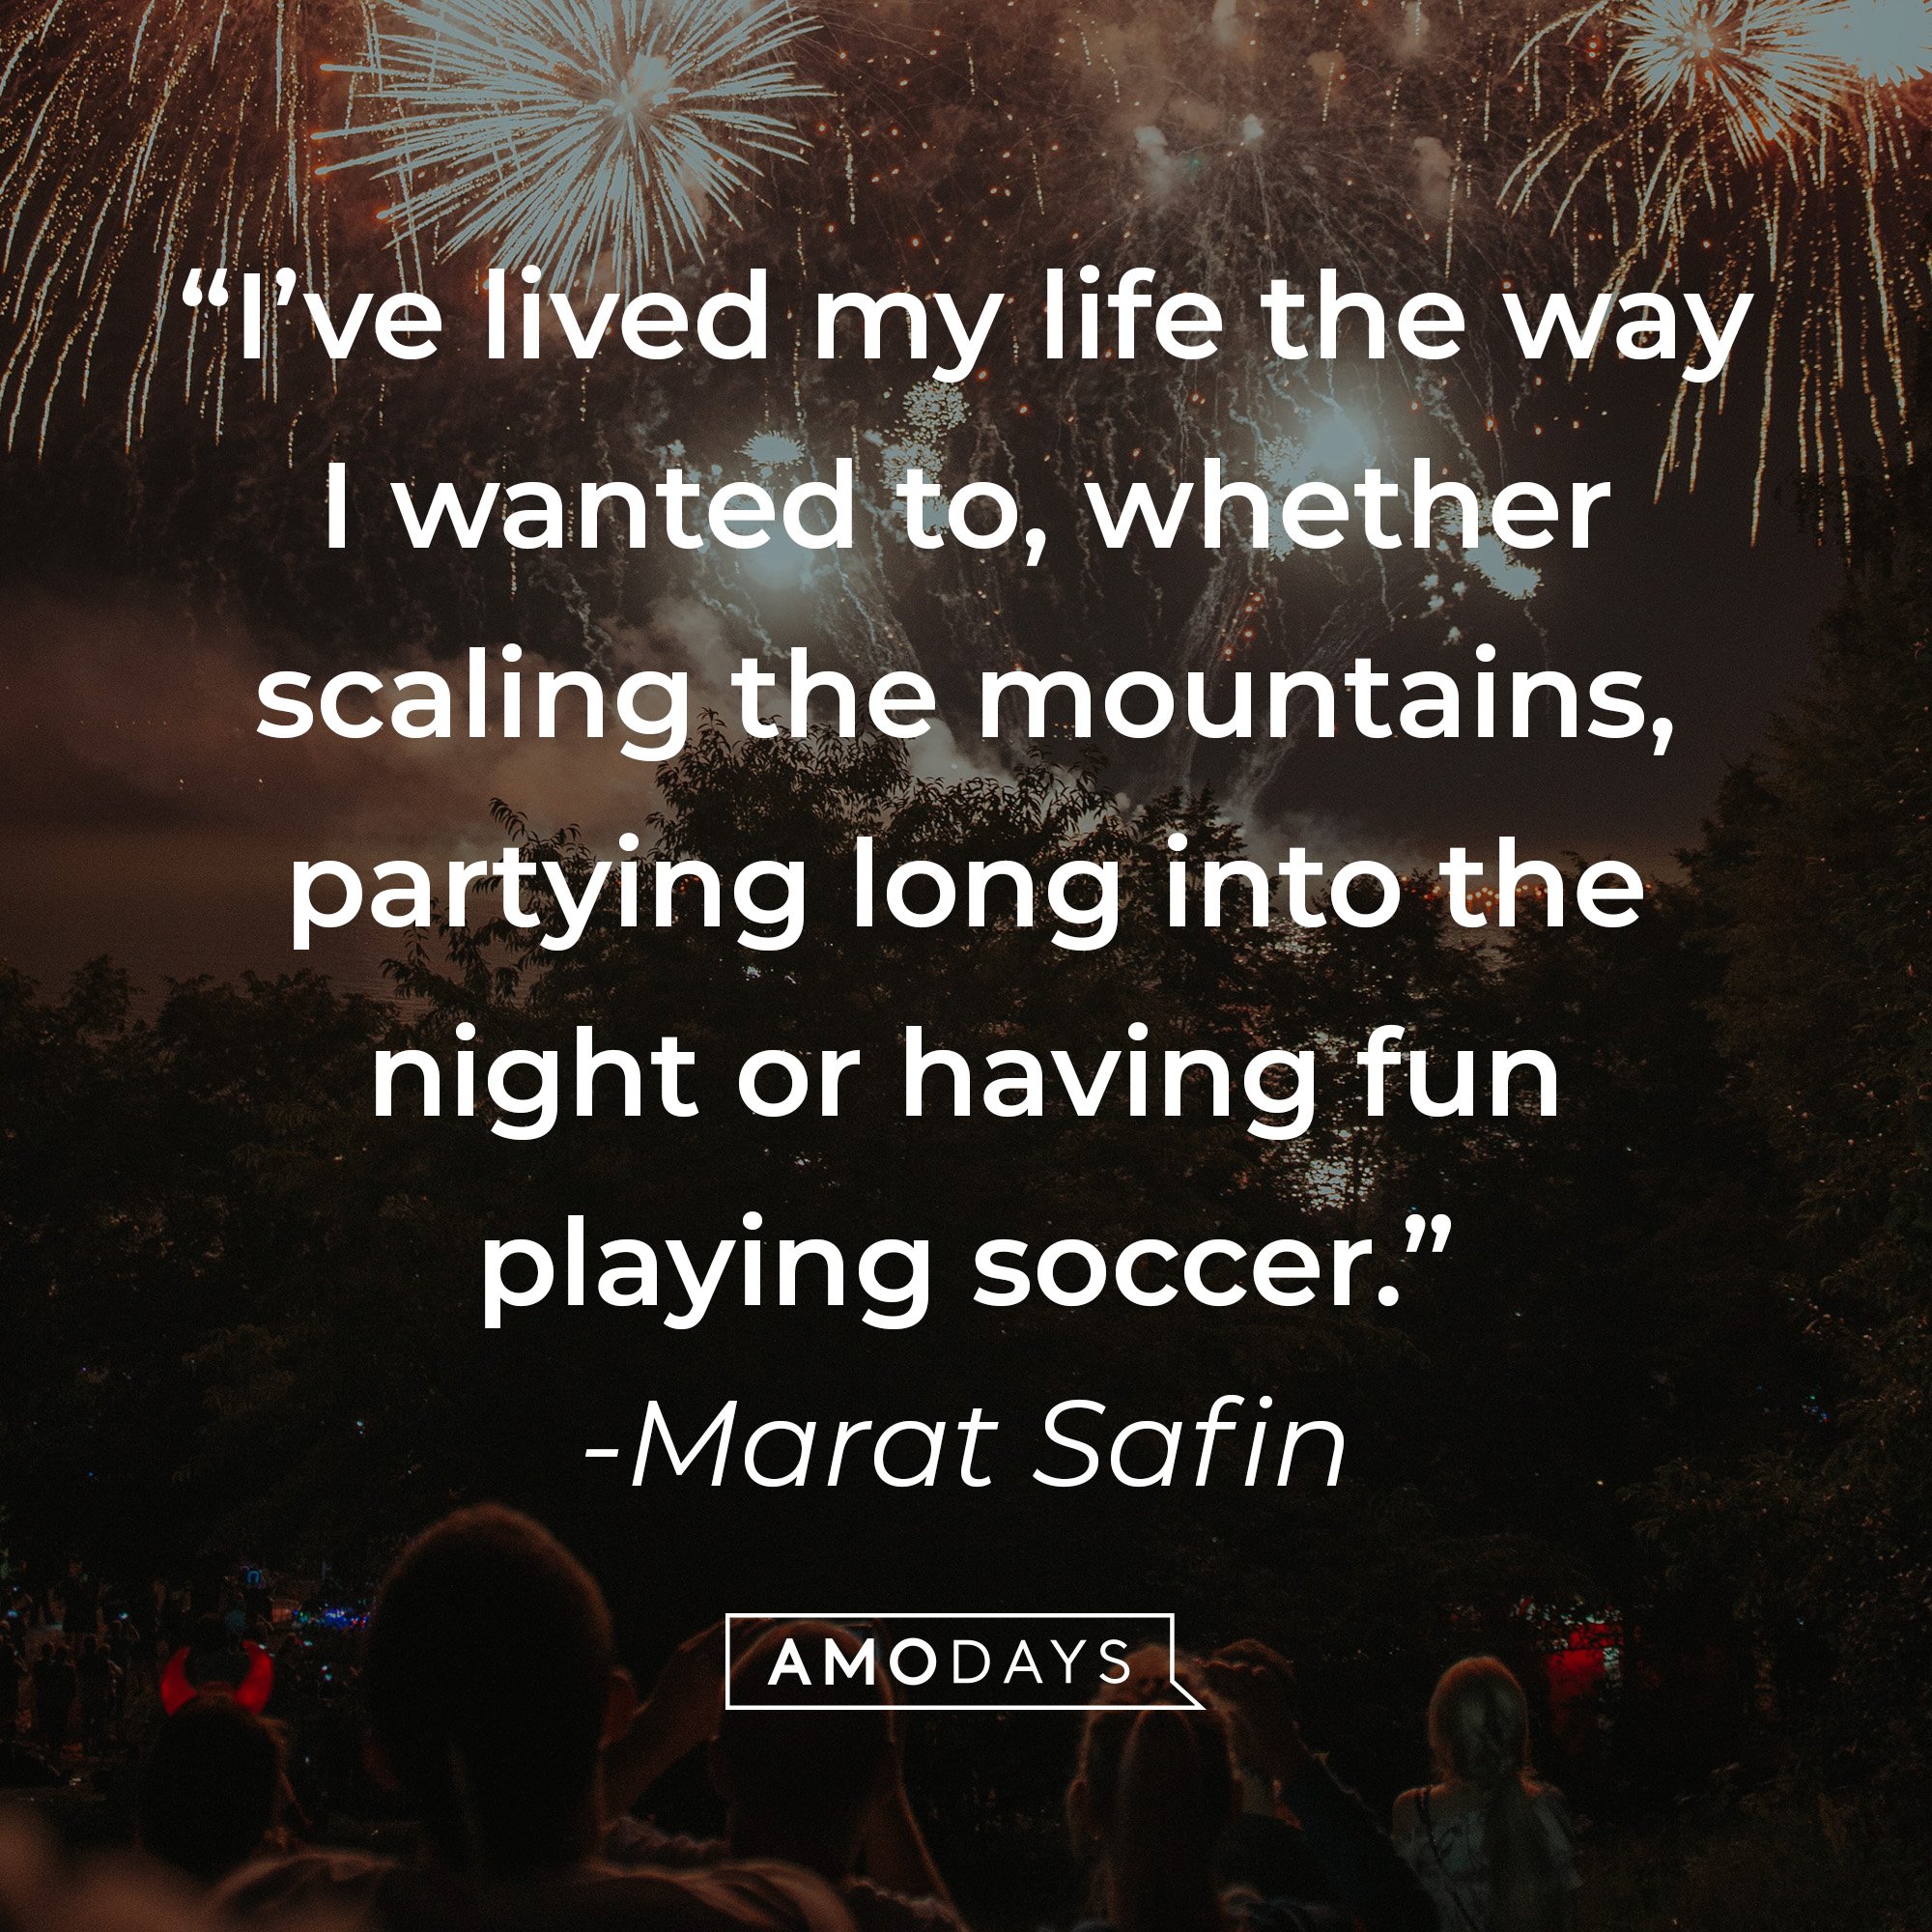 Marat Safin's quote: “I've lived my life the way I wanted to, whether scaling the mountains, partying long into the night, or having fun playing soccer.” | Image: AmoDays 